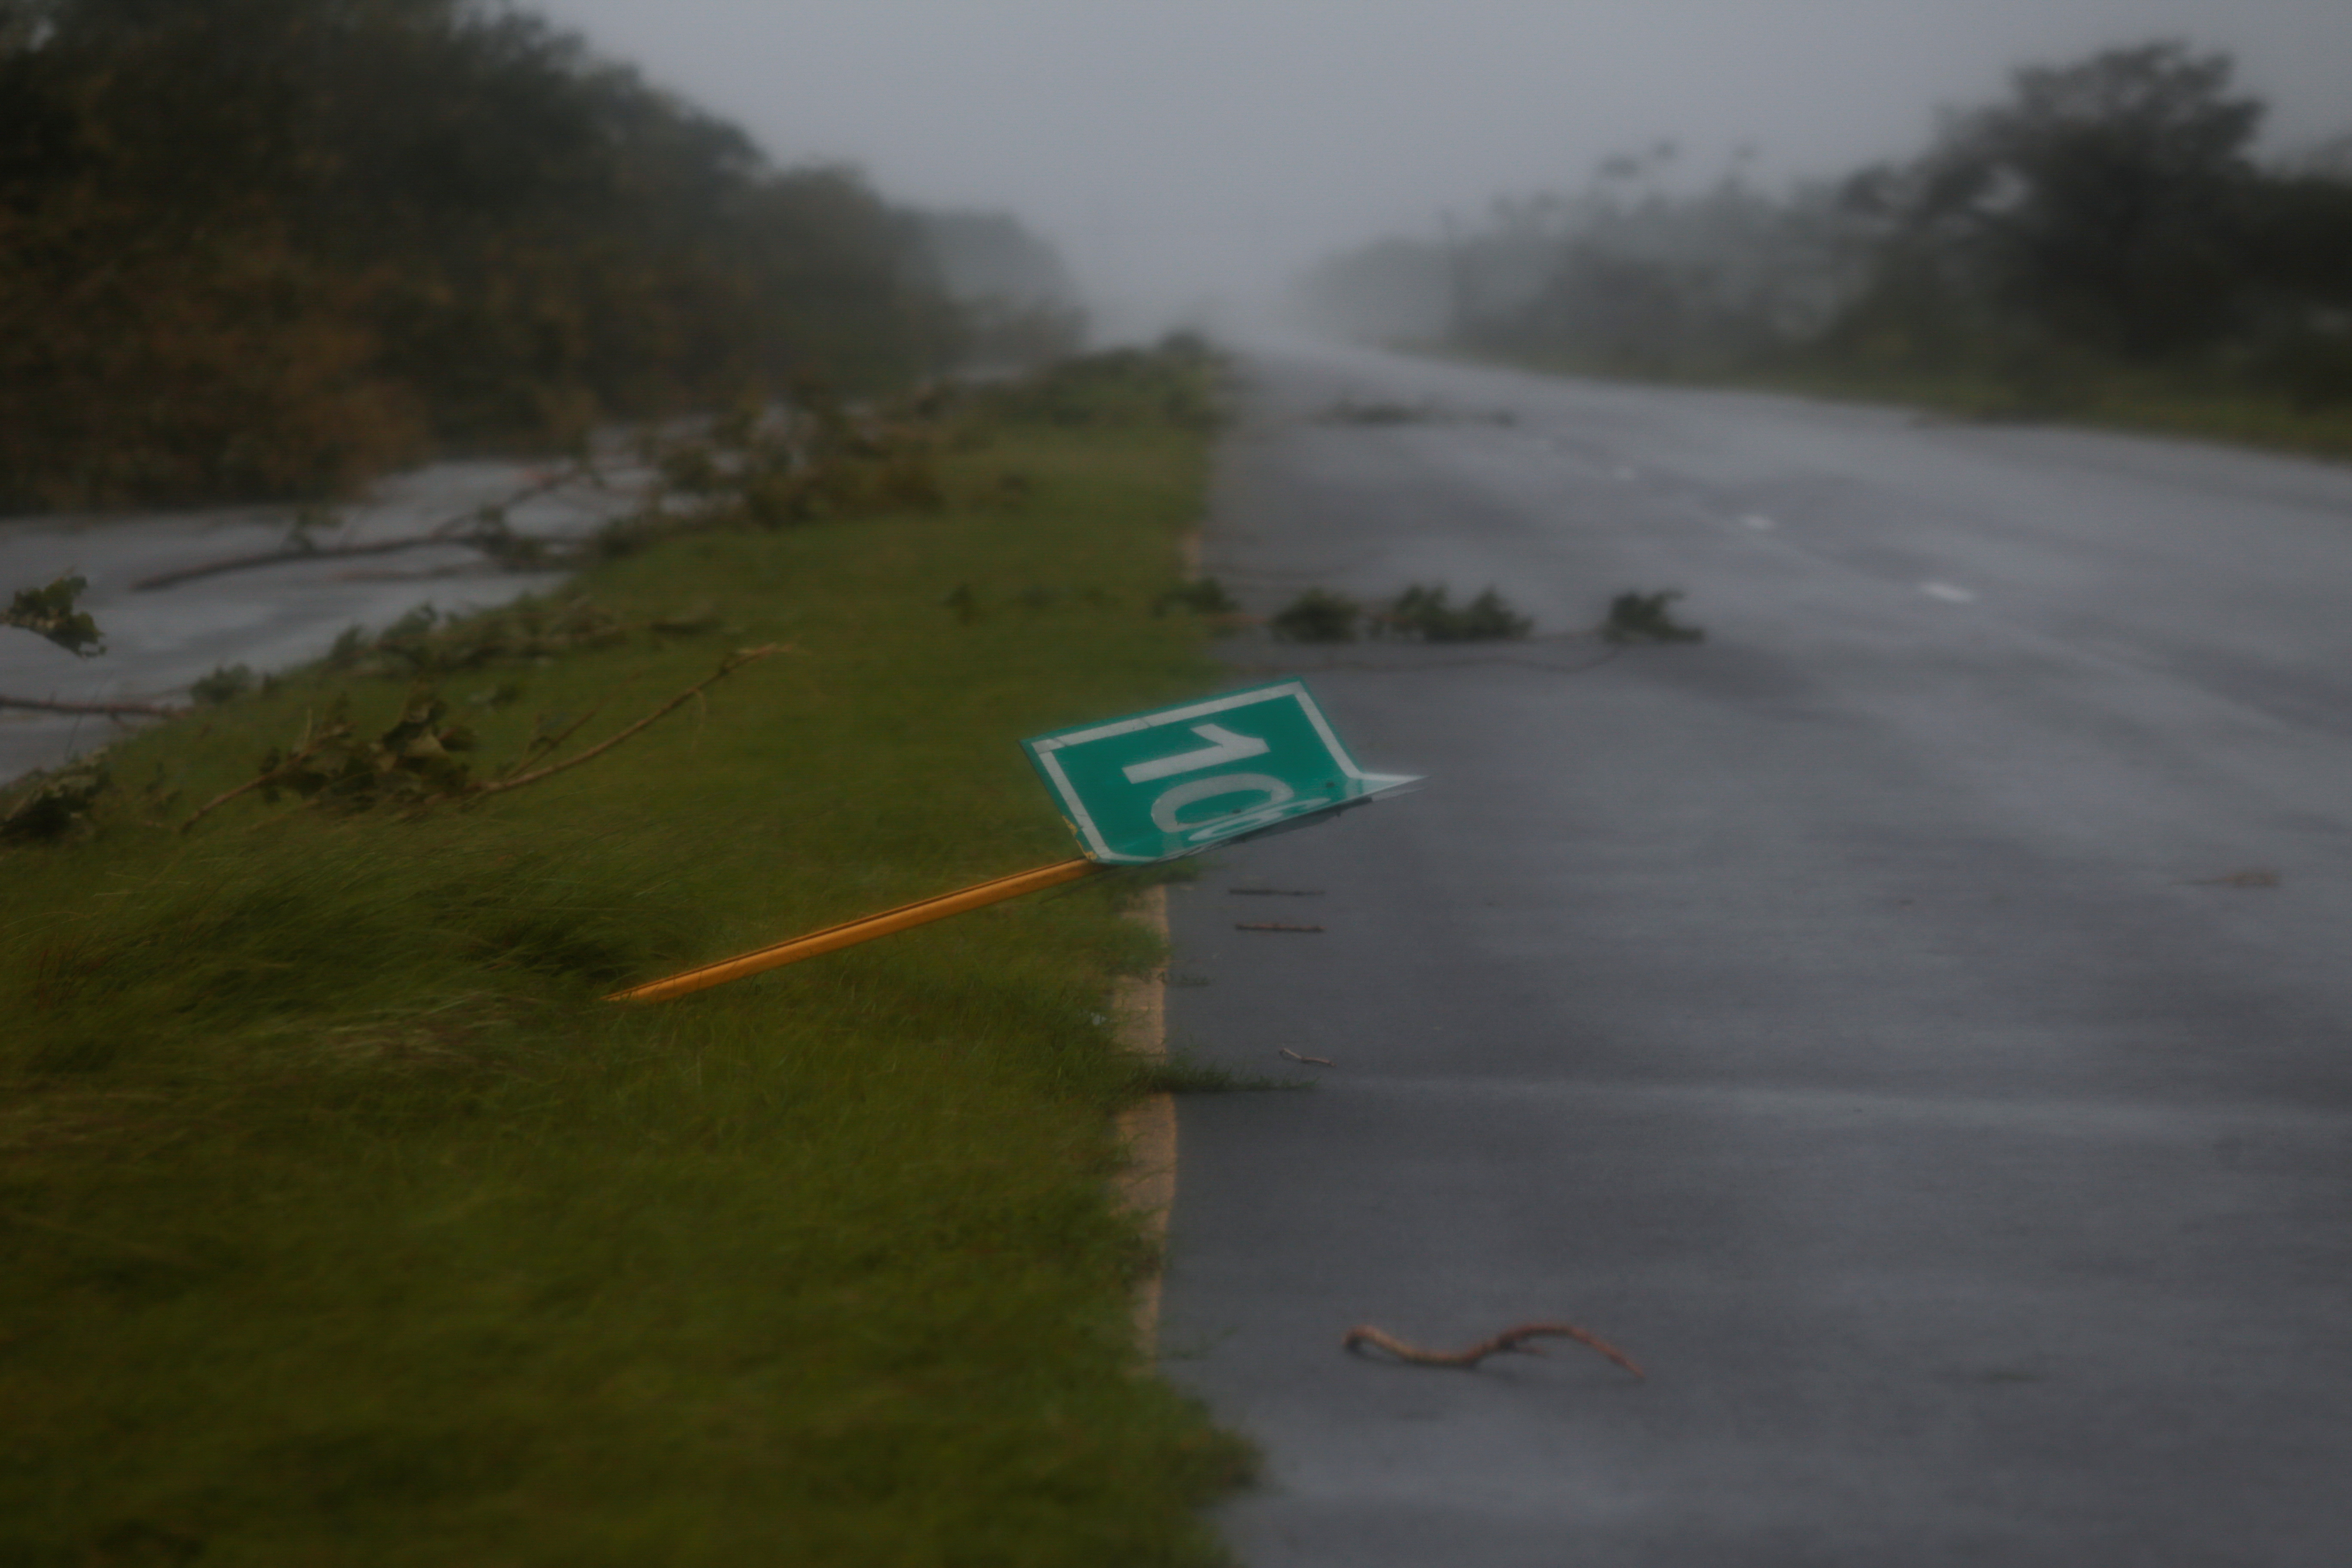 A fallen road sign and branches are pictured on a highway after Hurricane Ian made landfall in Cuba's Pinar del Rio province earlier, in Consulacion del Sur, Cuba September 27, 2022. REUTERS/Stringer NO RESALES. NO ARCHIVES